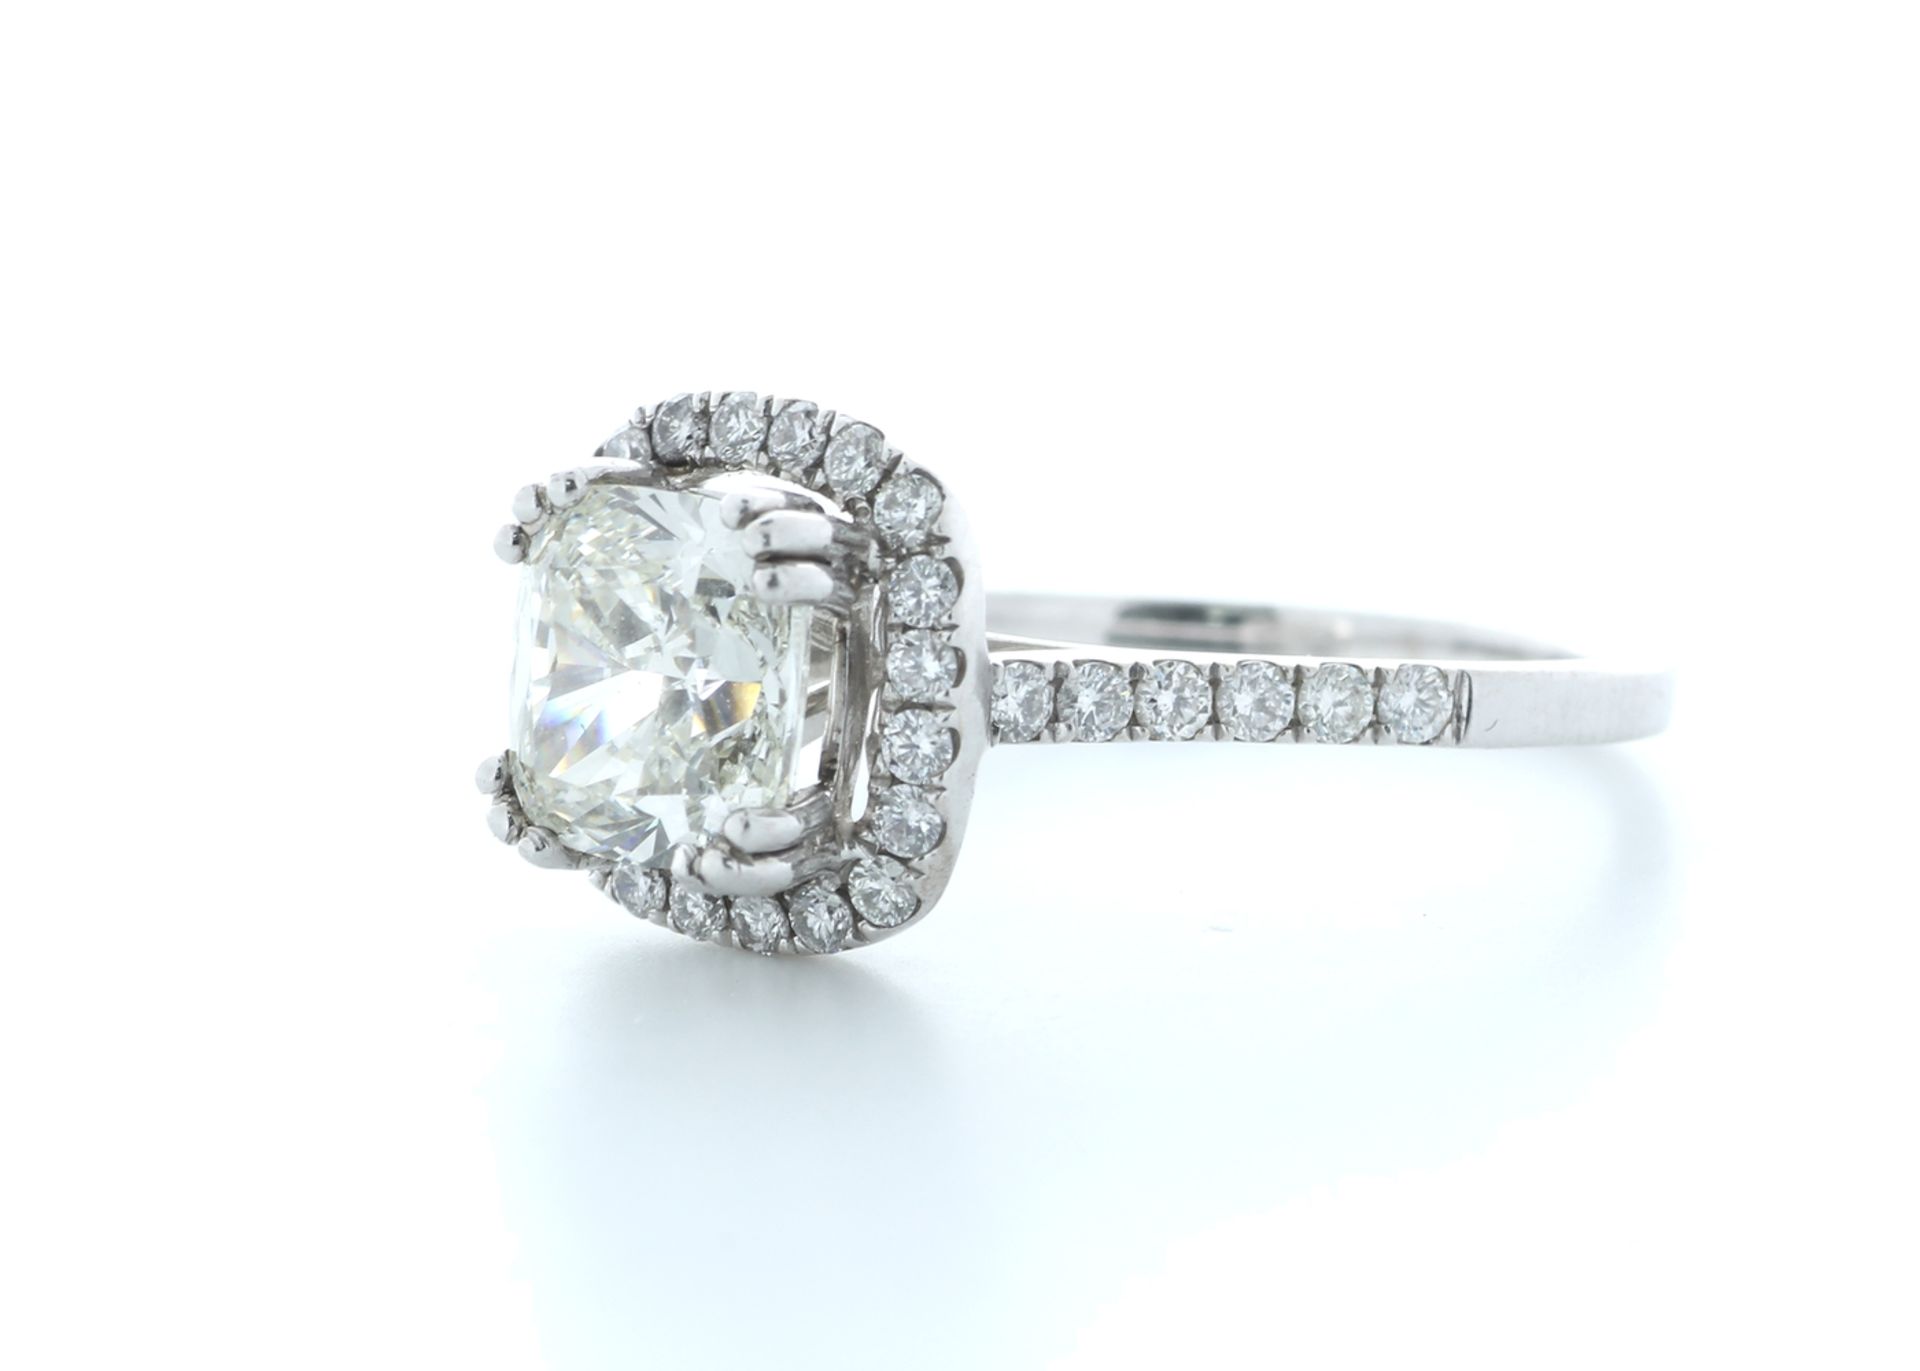 18ct White Gold Single Stone With Halo Setting Ring 2.63 (2.13) Carats - Valued by IDI £56,000. - Image 2 of 5